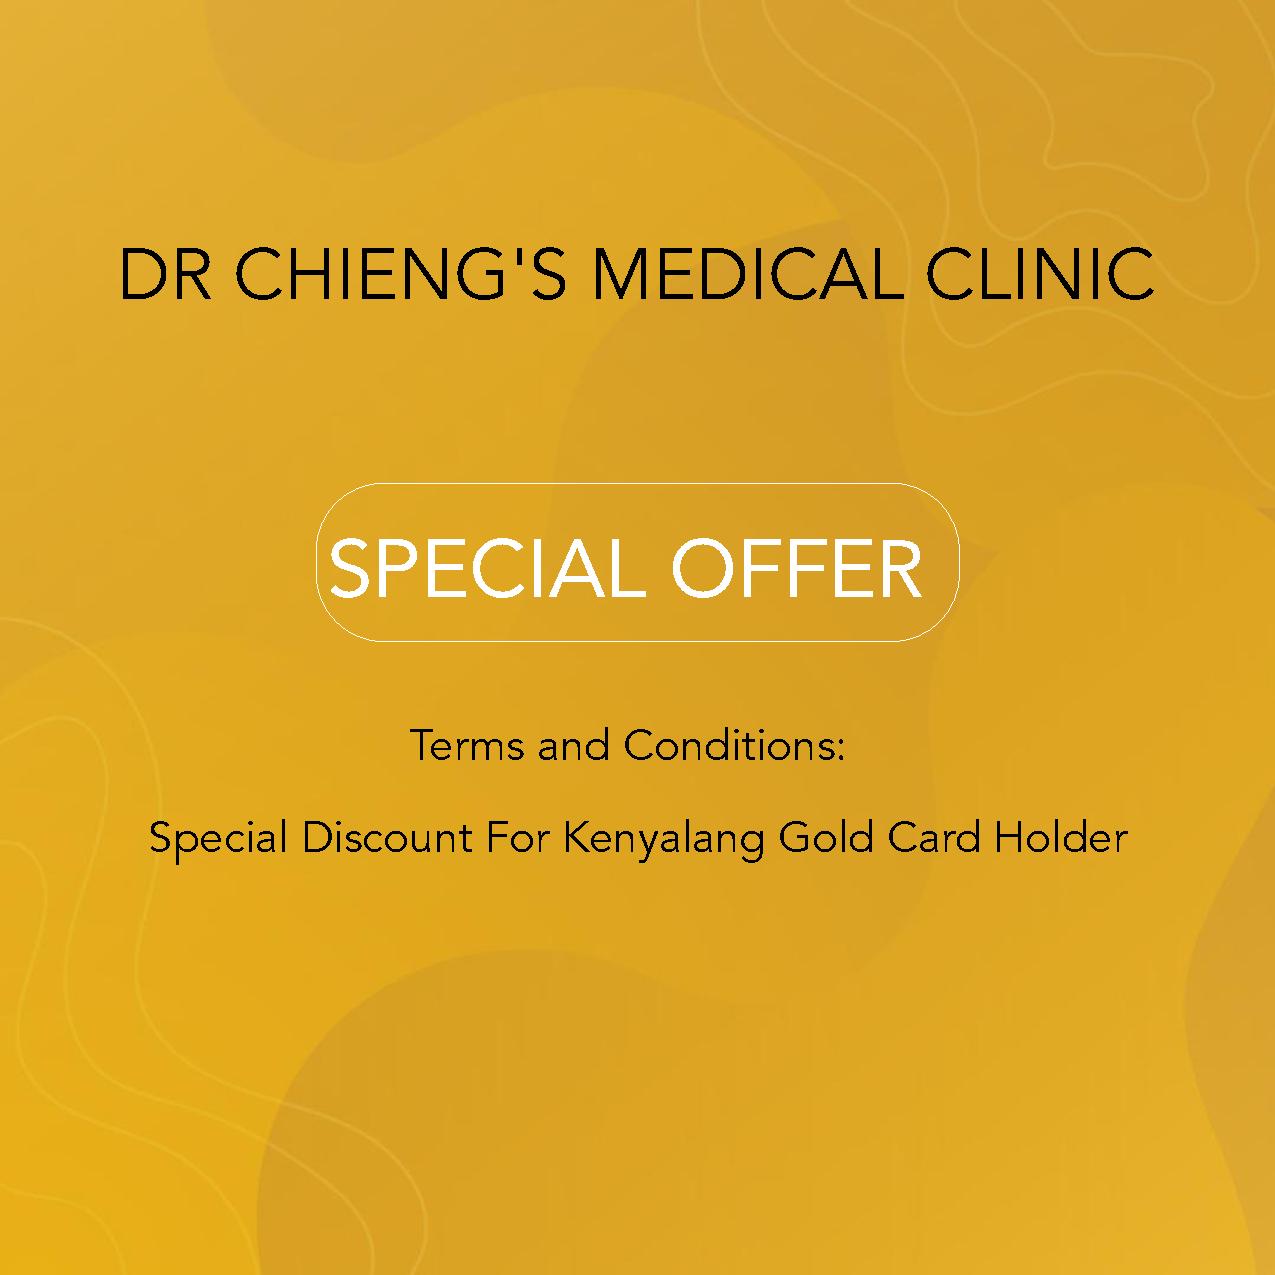 DR CHIENG'S MEDICAL CLINIC